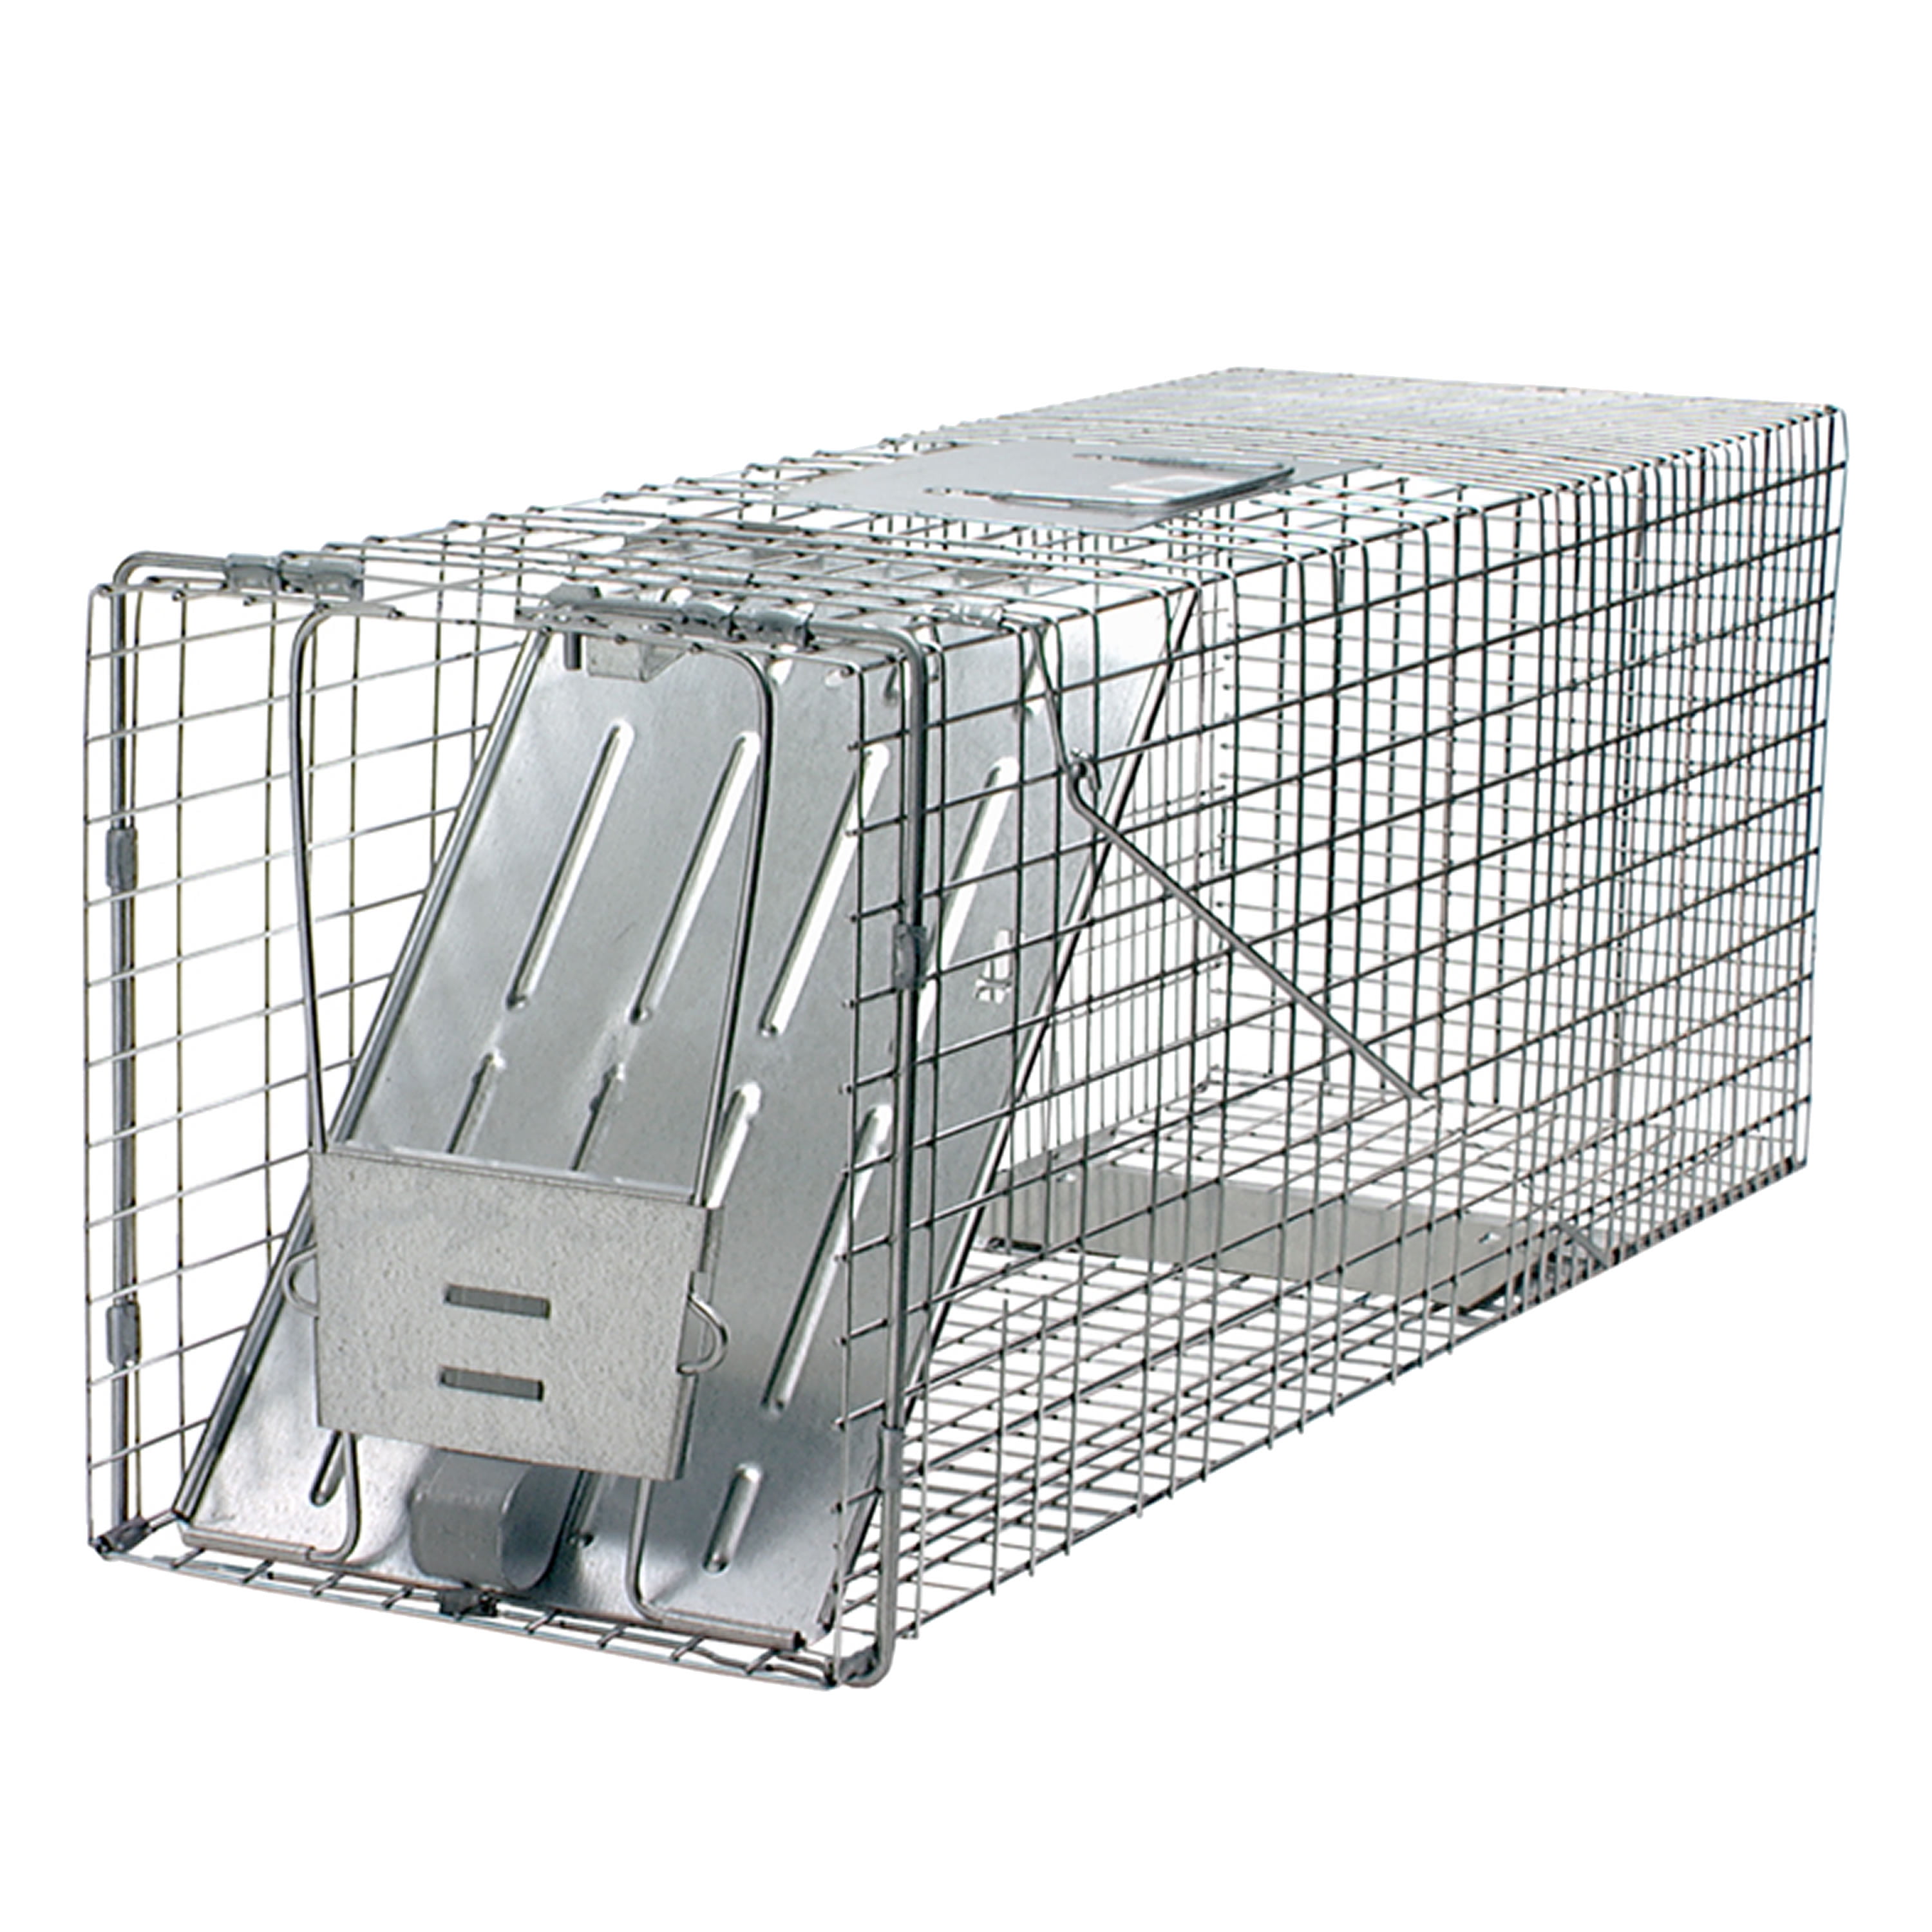 Details about   Humane Small Live Animal Control Steel Trap Cage Raccoon Skunk Cat 32"x12.5"x12" 